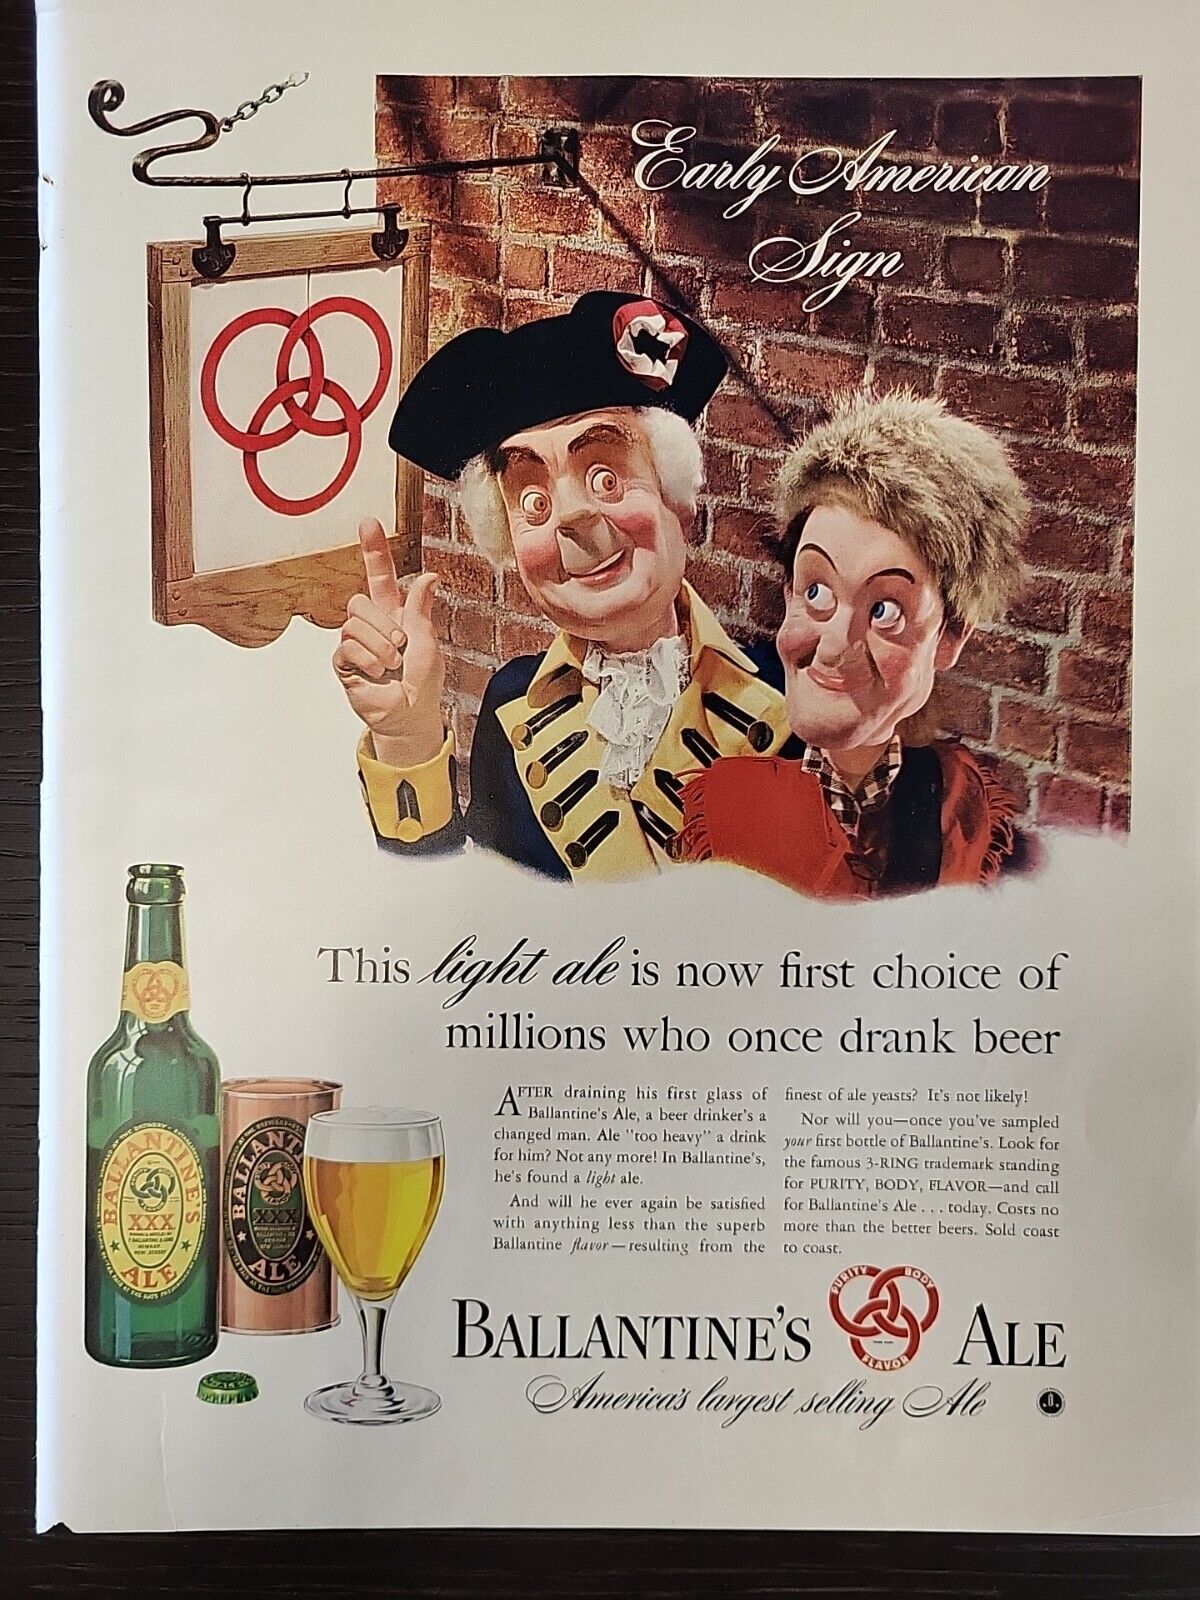 1941 Ballantine's Ale Print Advertising beer Early American Patriots 3-Ring LIFE